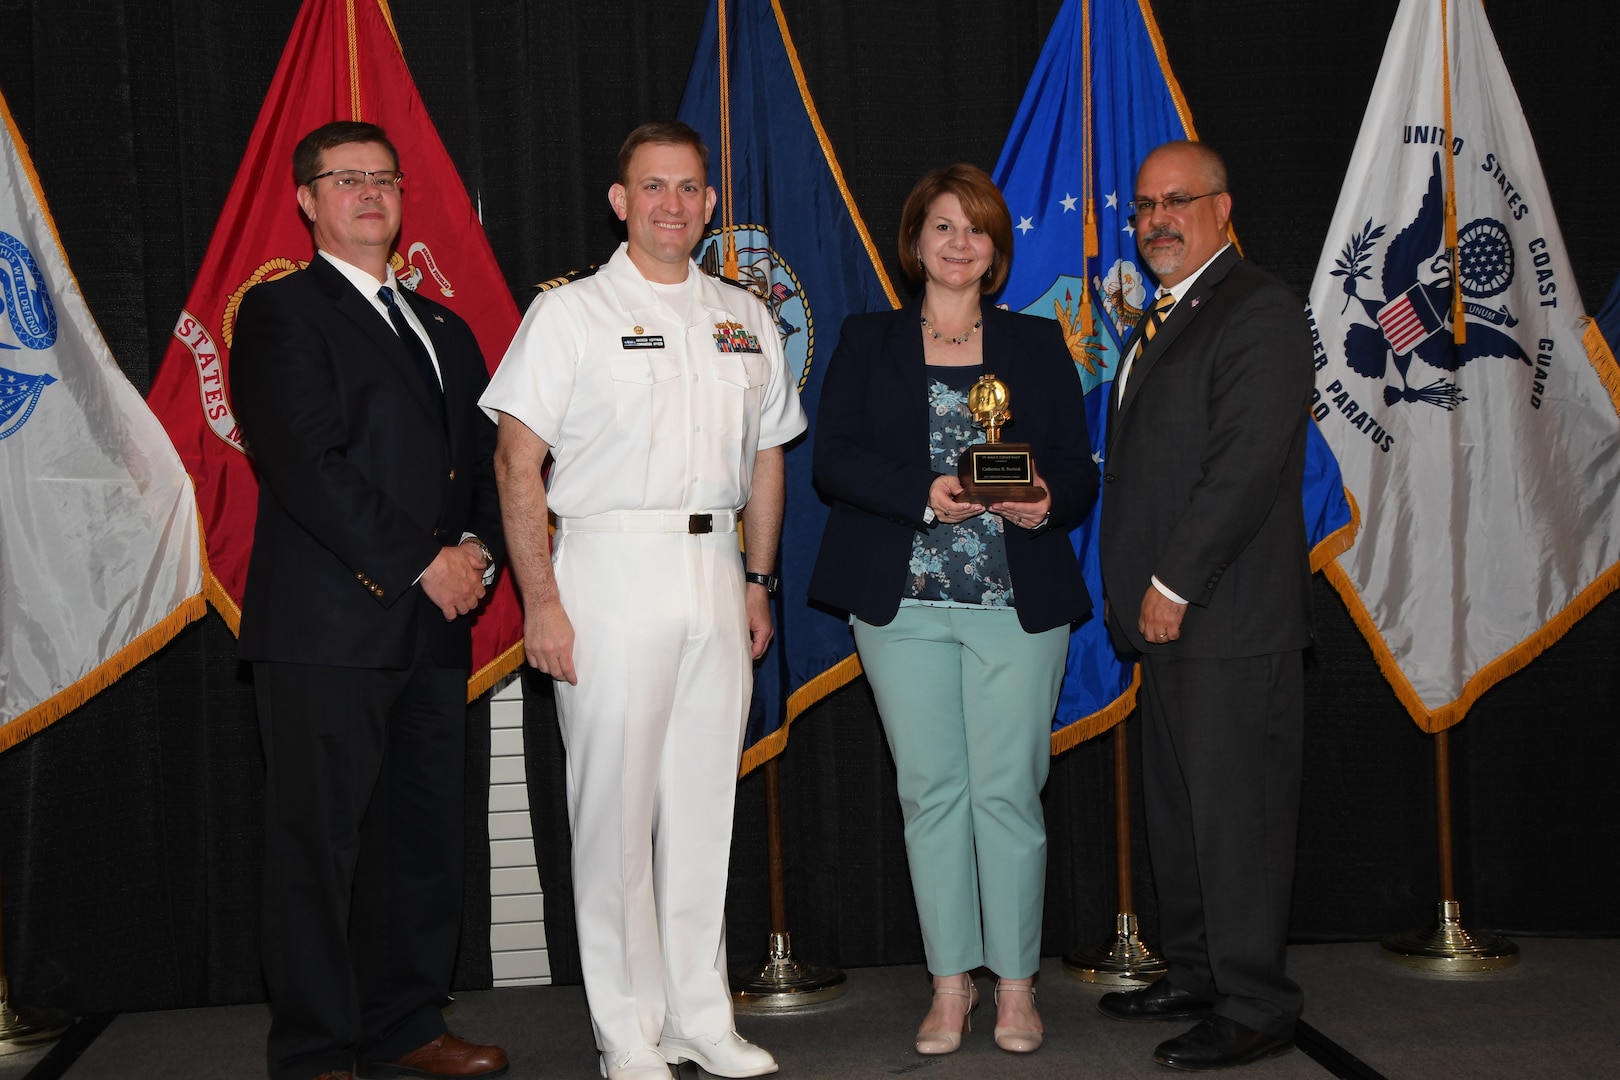 IMAGE: Catherine Borisuk is presented the Dr. James Colvard Award at Naval Surface Warfare Center Dahlgren Division's annual awards ceremony, Apr. 26 at the Fredericksburg Expo and Conference Center.